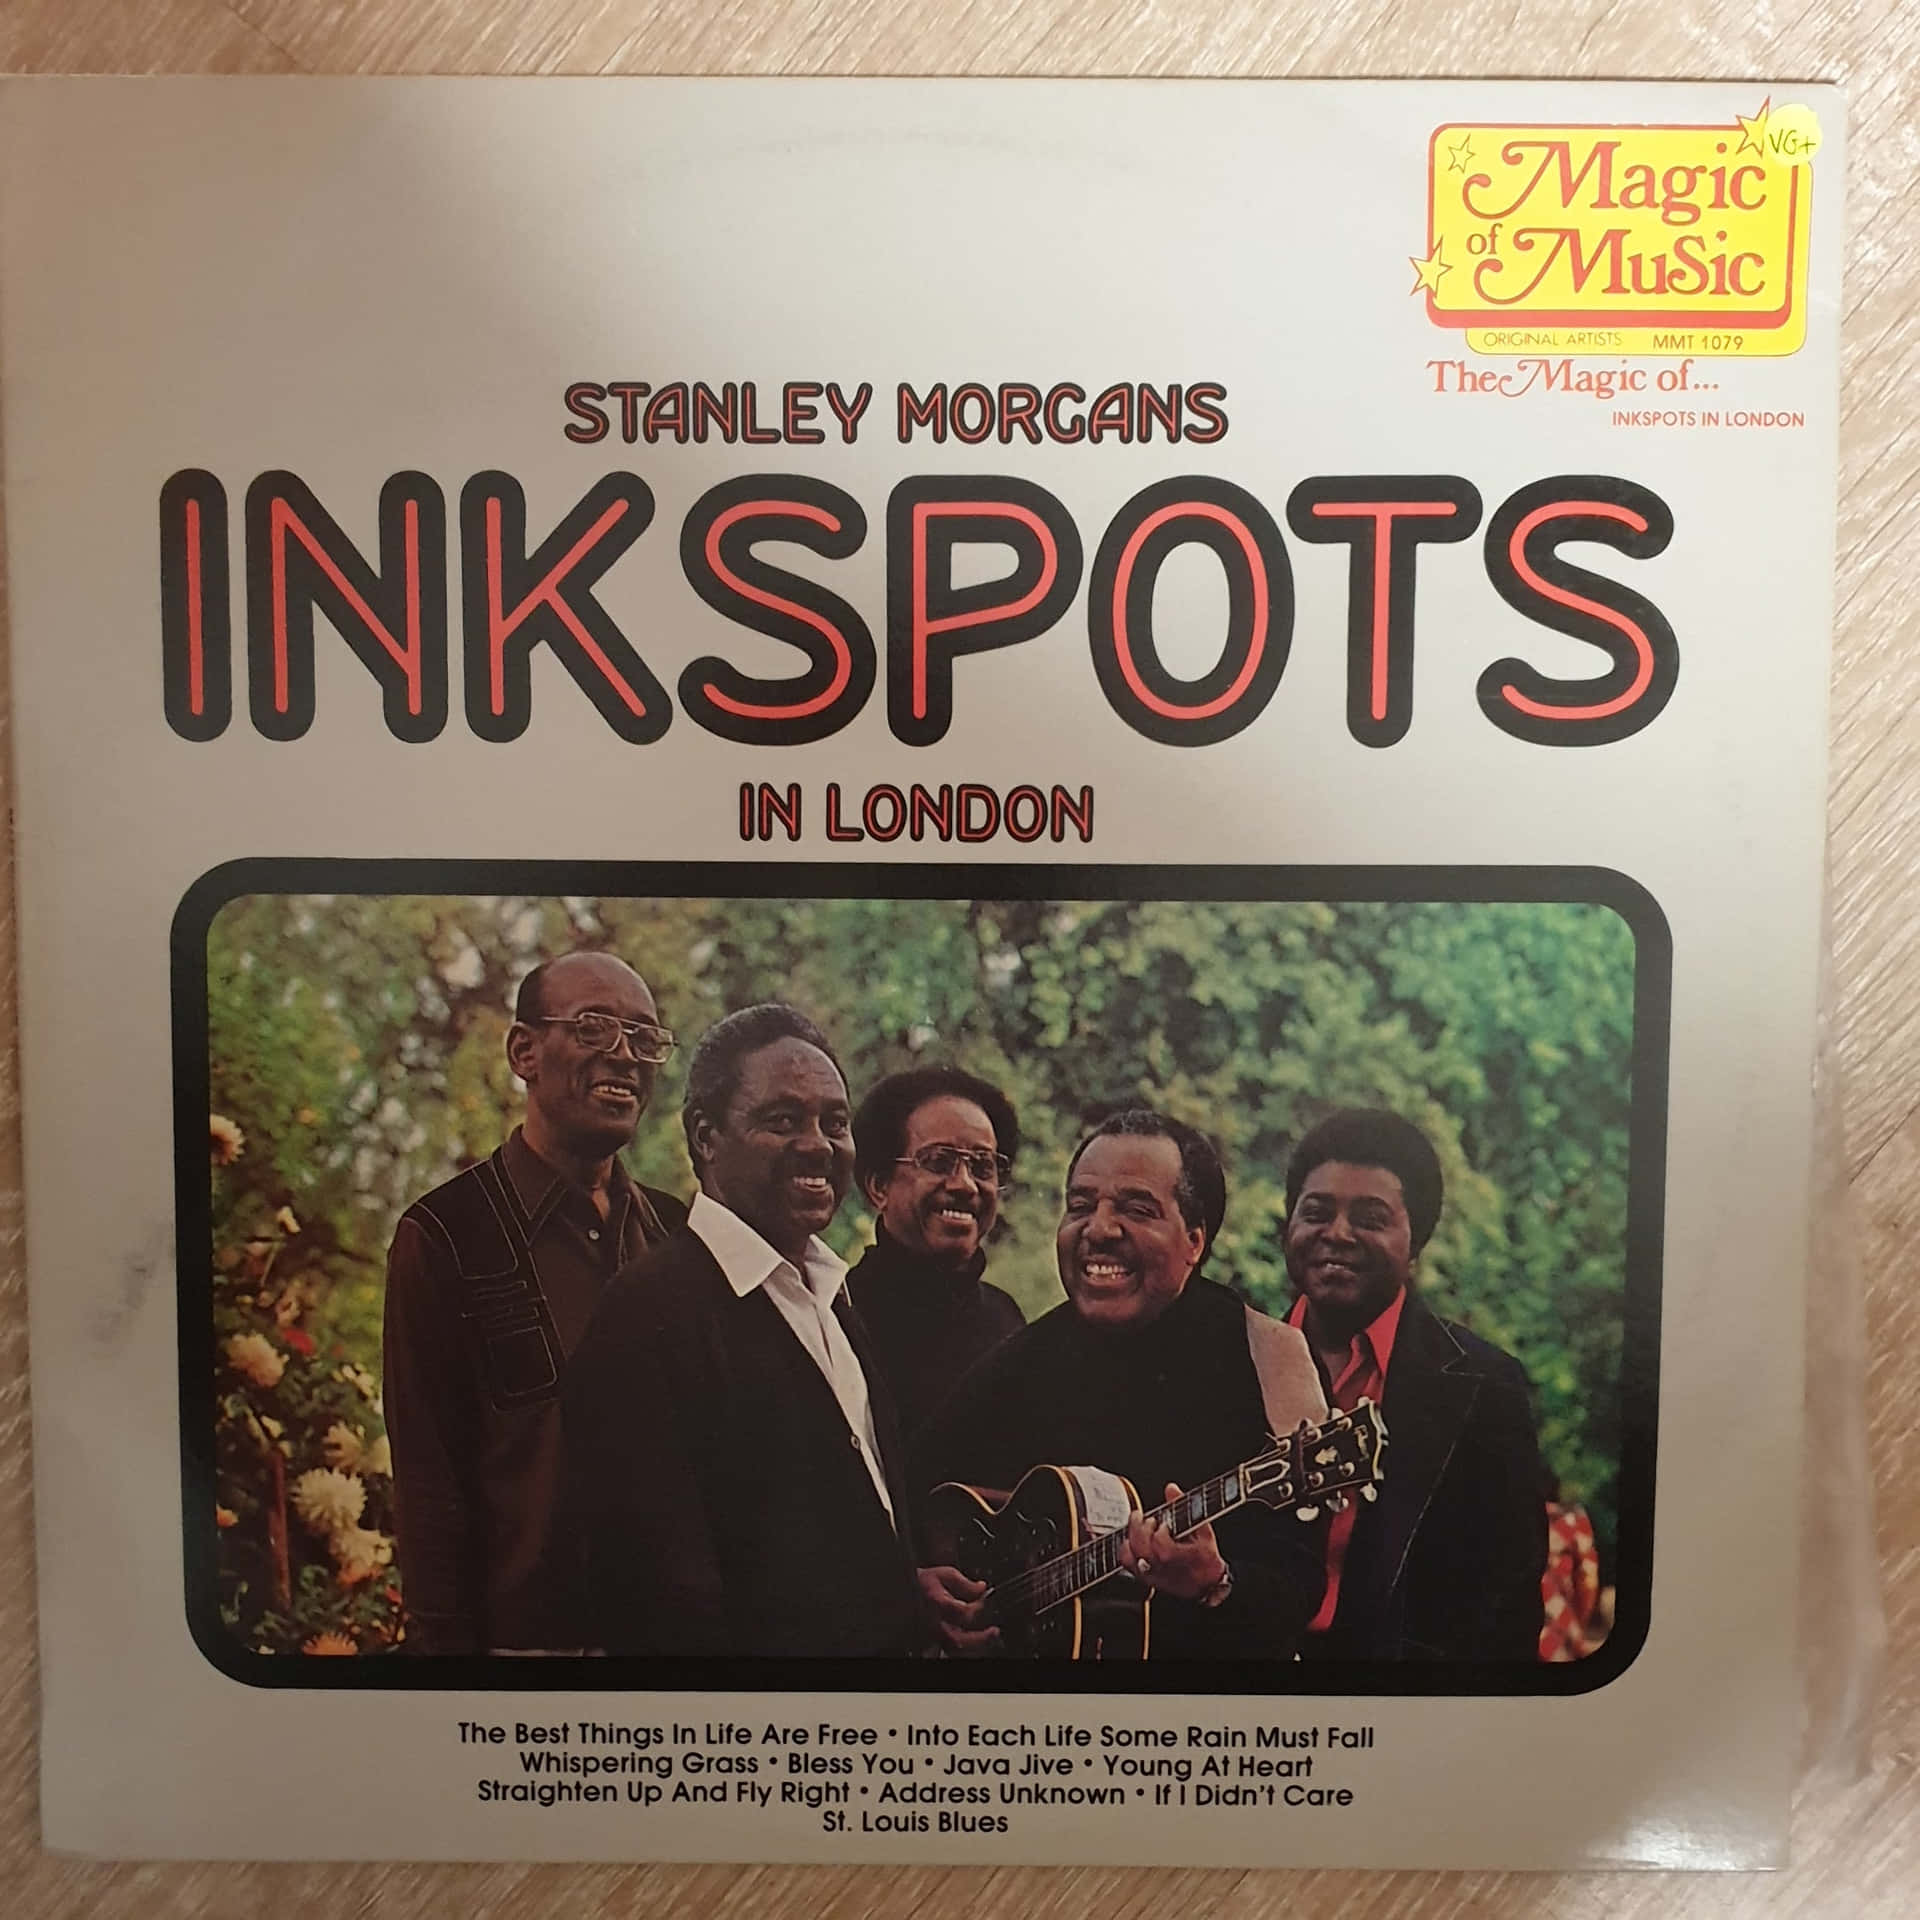 Stanleymorgan Ink Spots Can Be Translated To Italian As 